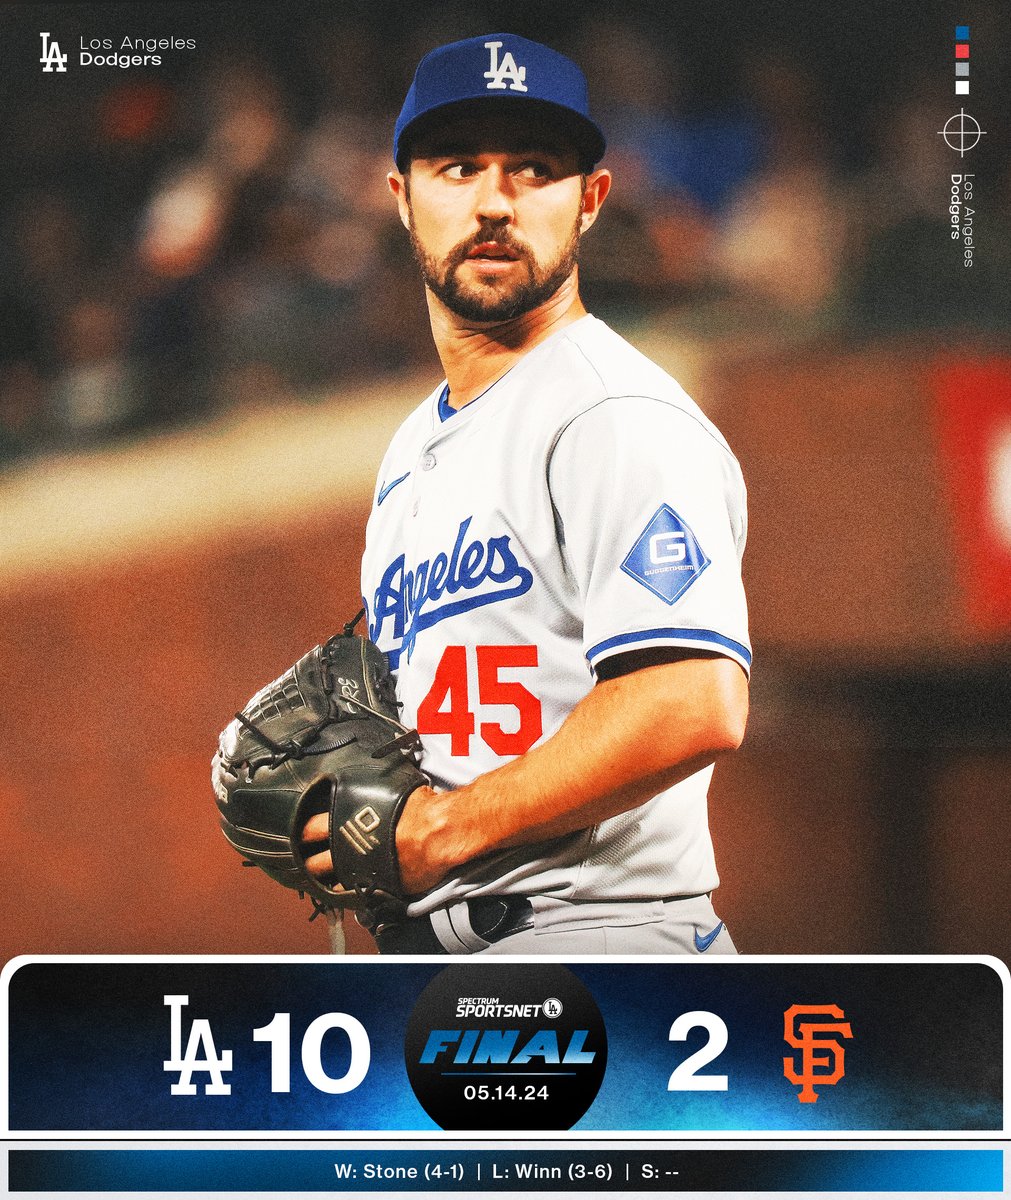 #Dodgers take game 2 over the Giants 10-2.